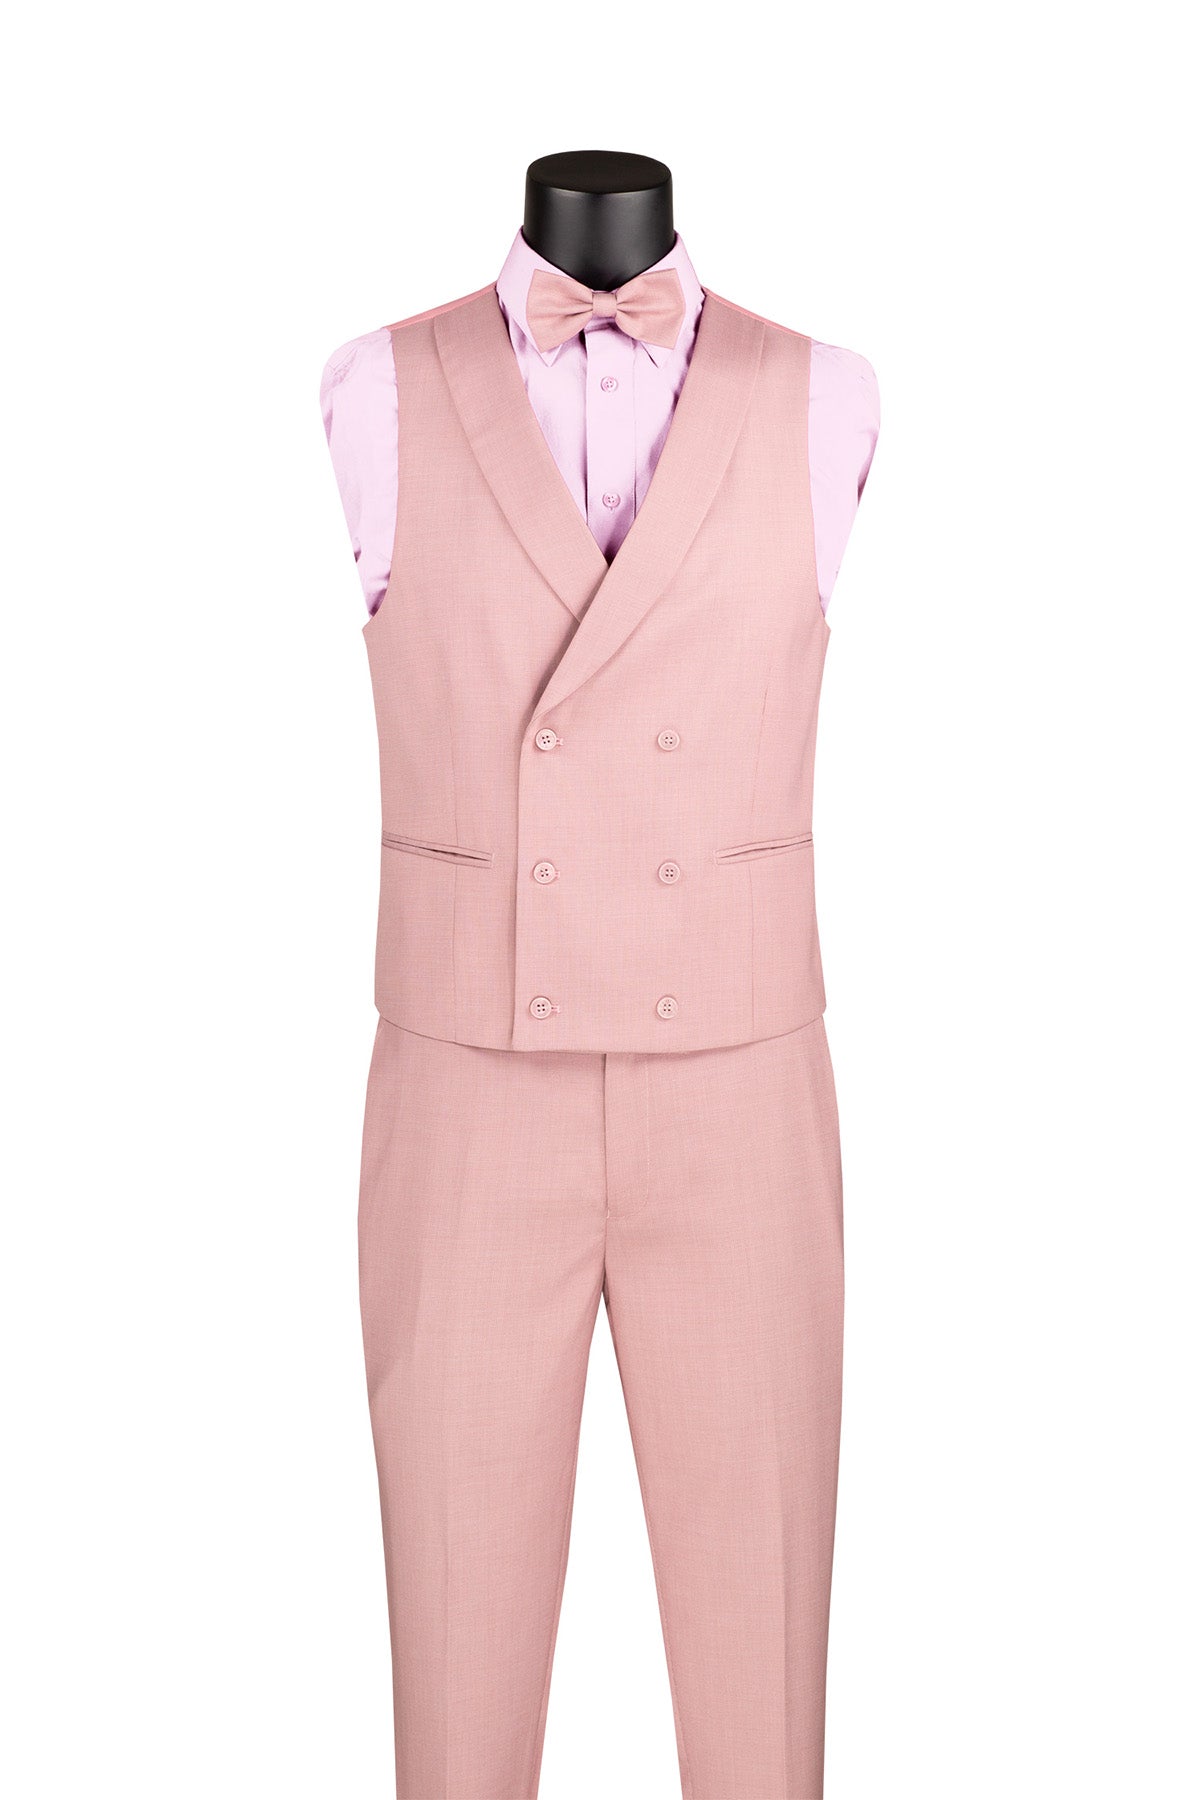 Slim Fit Tuxedo 3 Piece with Matching Bow Tie in Mauve